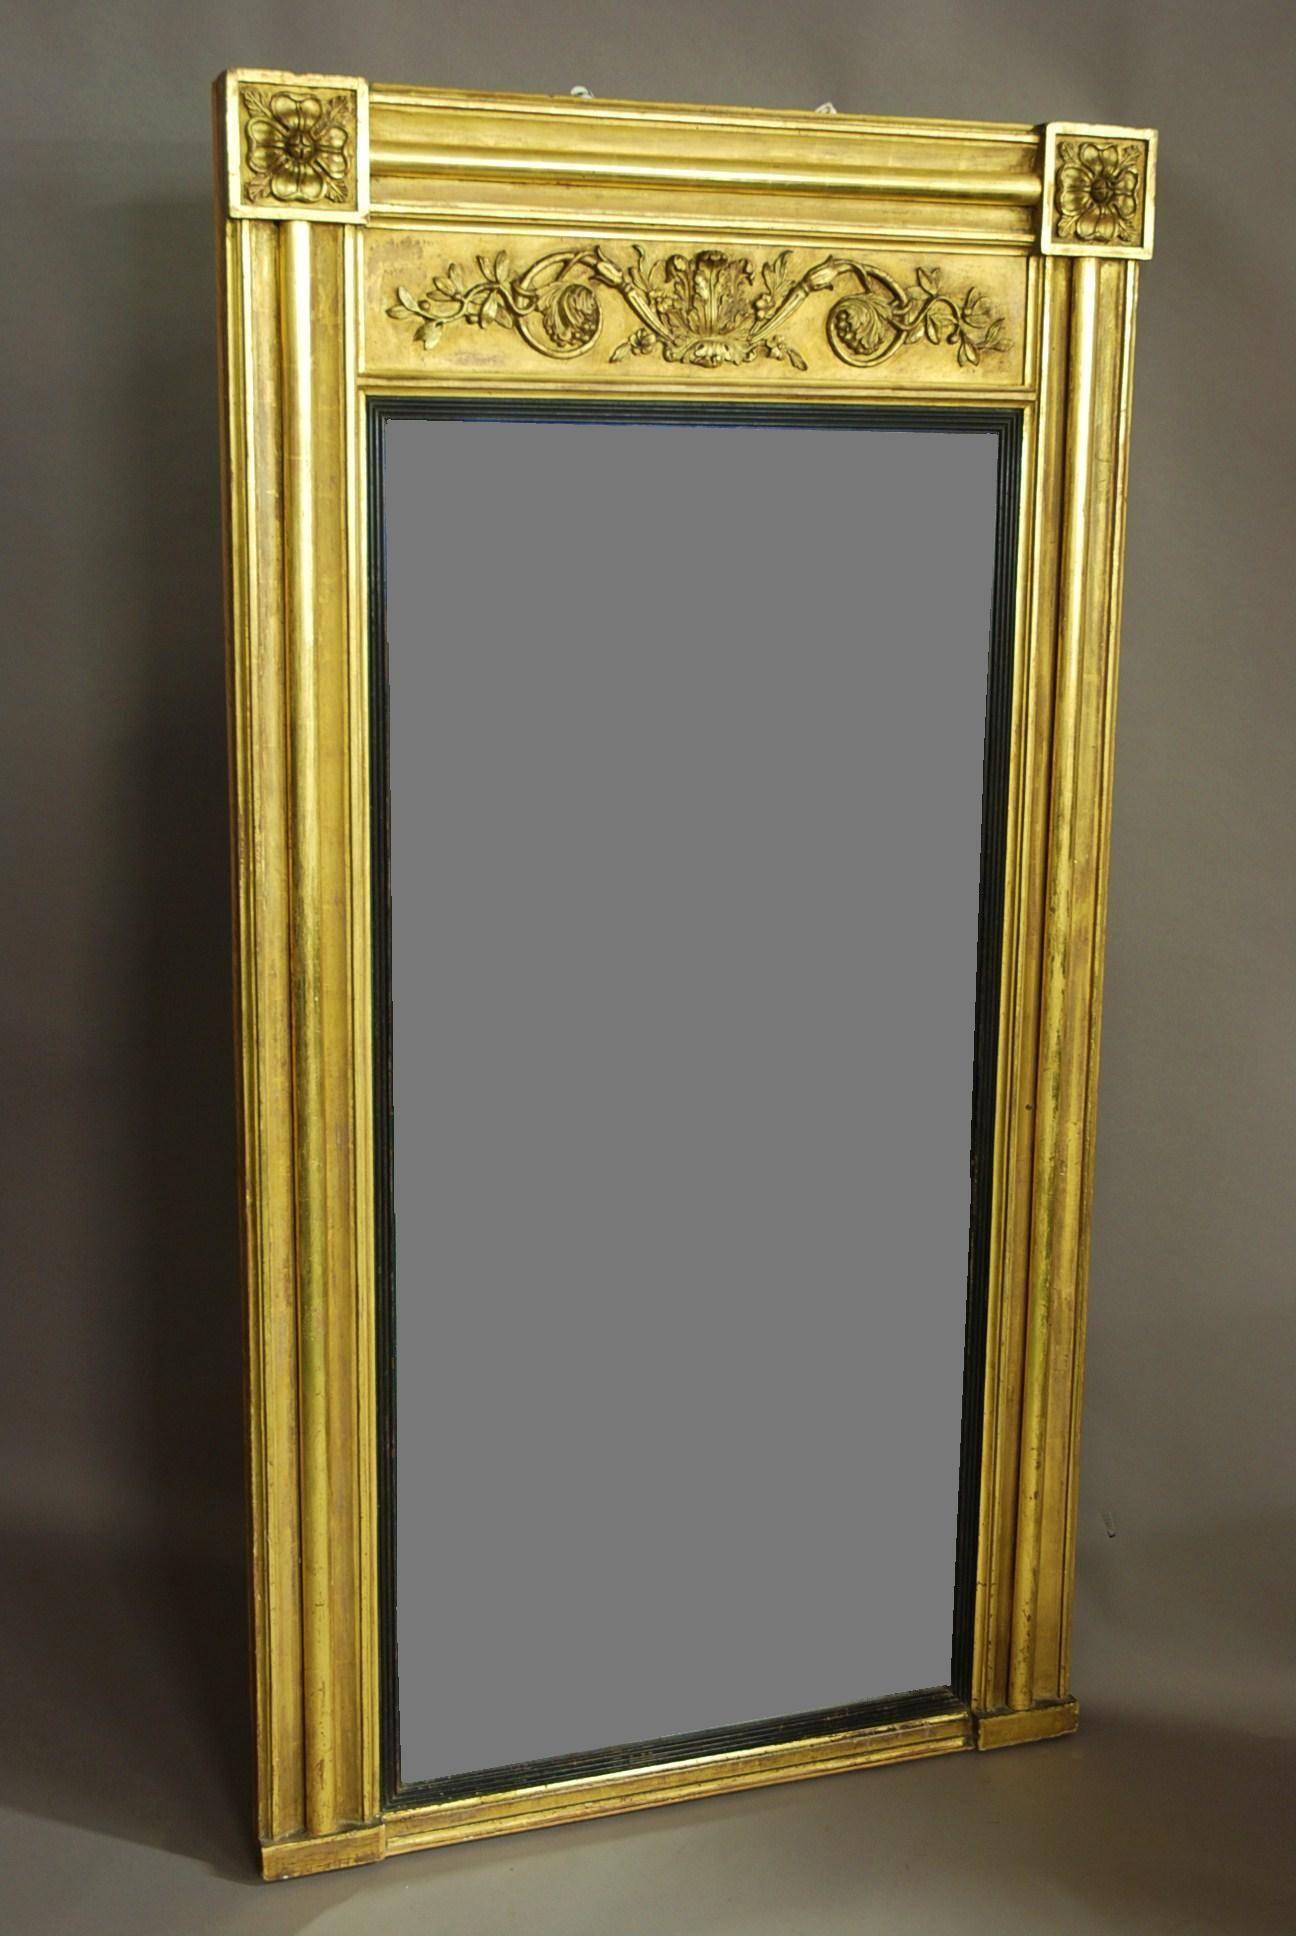 English Early 19th Century Regency Gilt Pier Mirror of Large Proportions